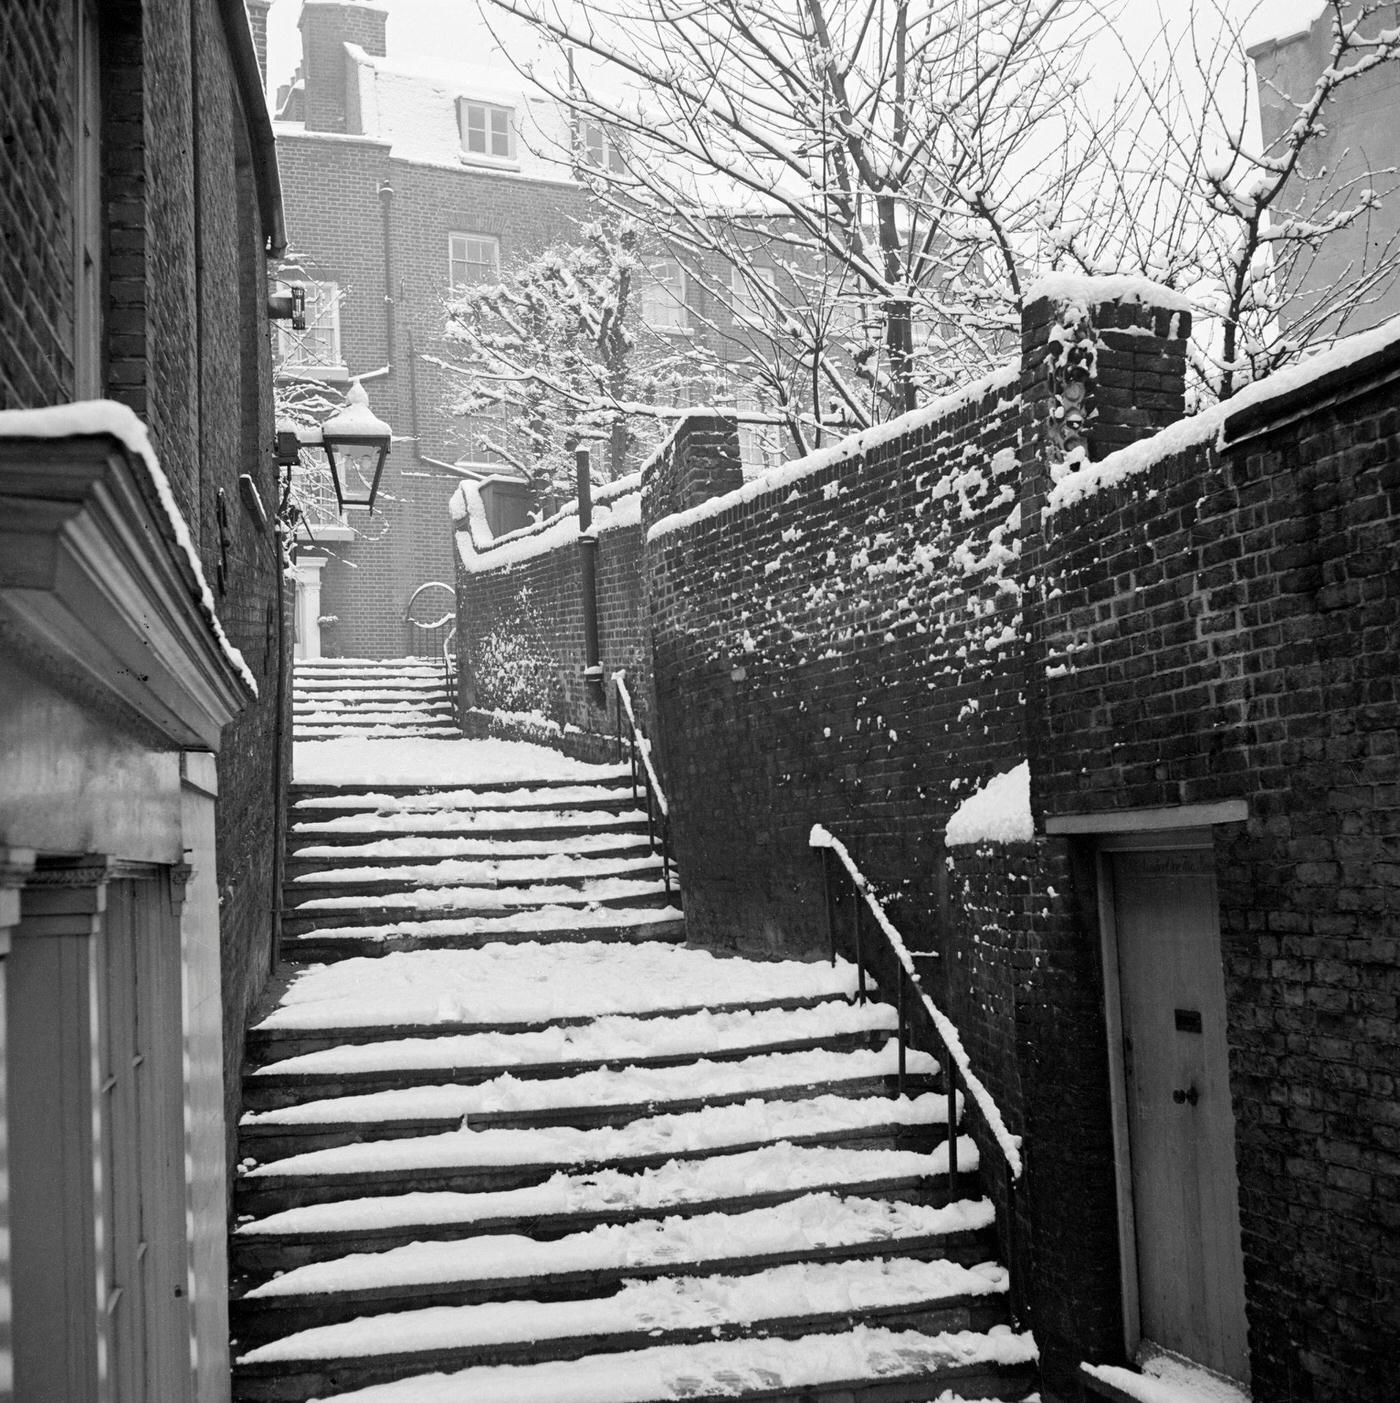 Three flights of steps in the snow, part of the narrow passage running between Heath Street and Hampstead Grove.